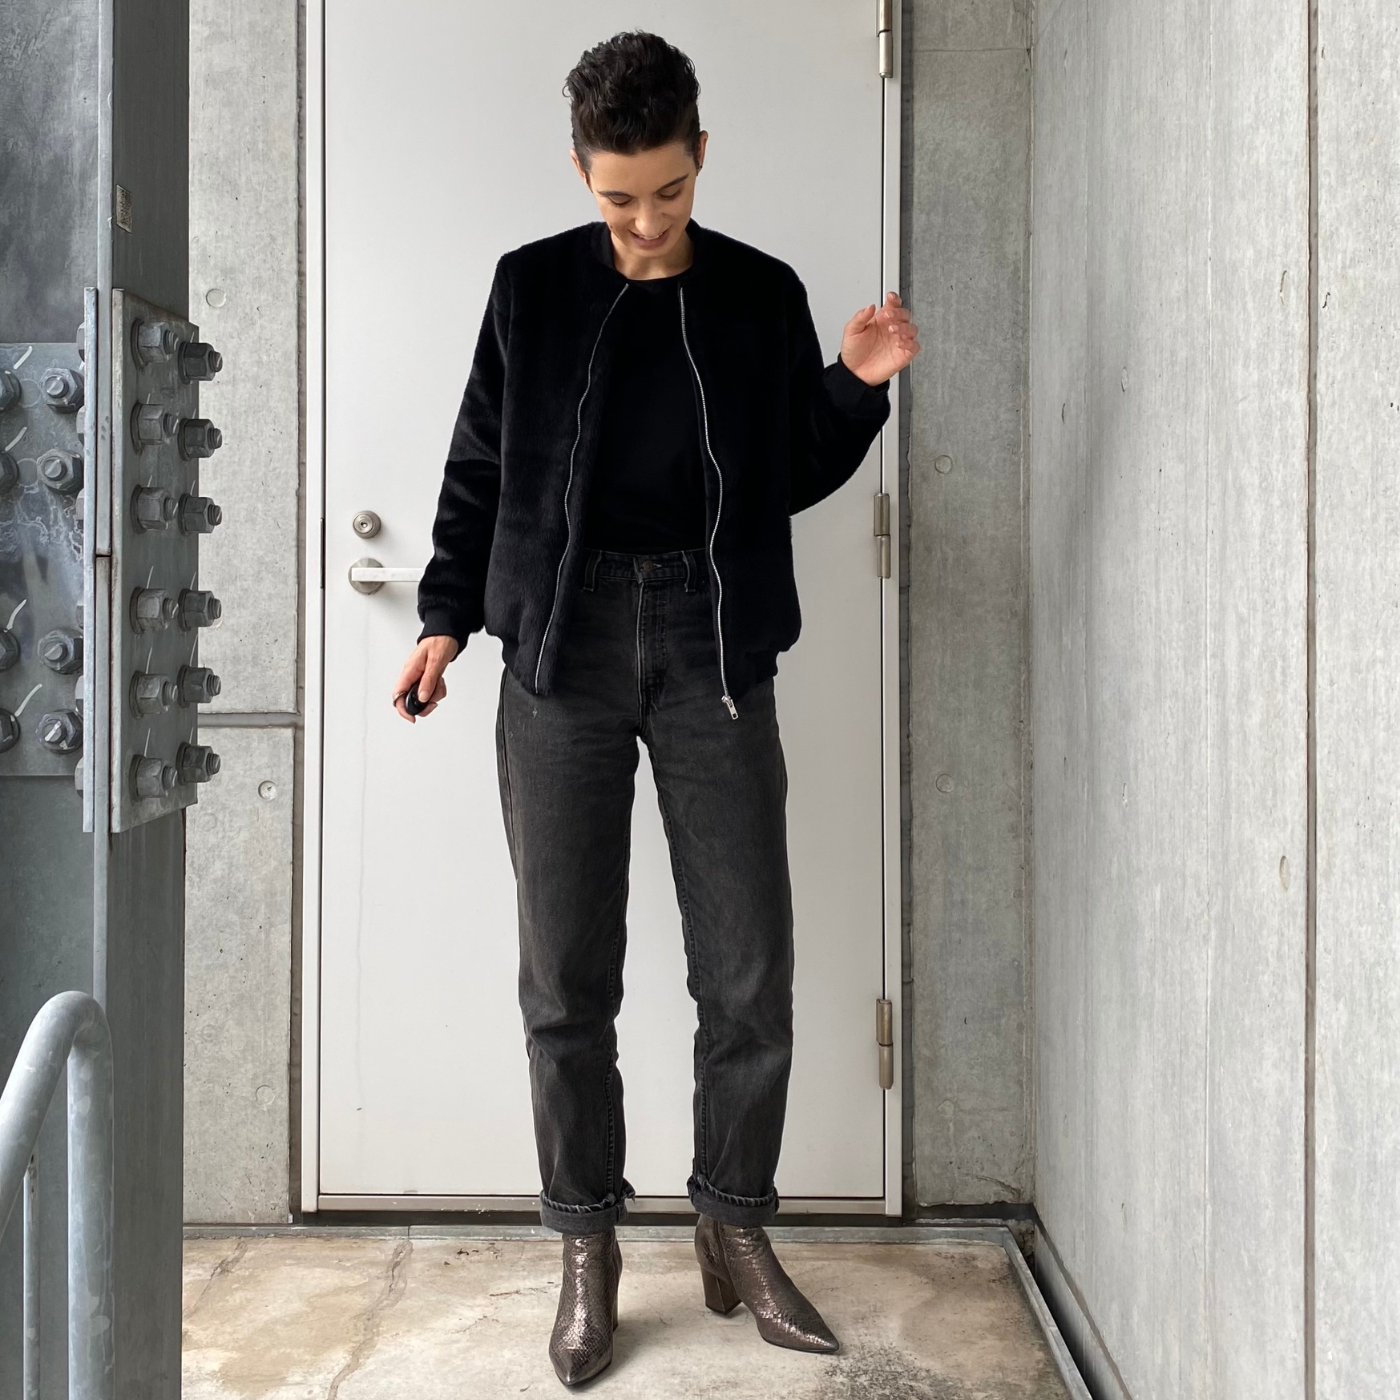 Emilia stands at the end of a concrete walkway with a gray wall to the right and a gray door and wall behind them. They are wearing black jeans, a black shirt and a black unzipped zippered jacket and black short heels. They are looking down and smiling, their left hand is up by their left shoulder and their right hand is down by their waist.